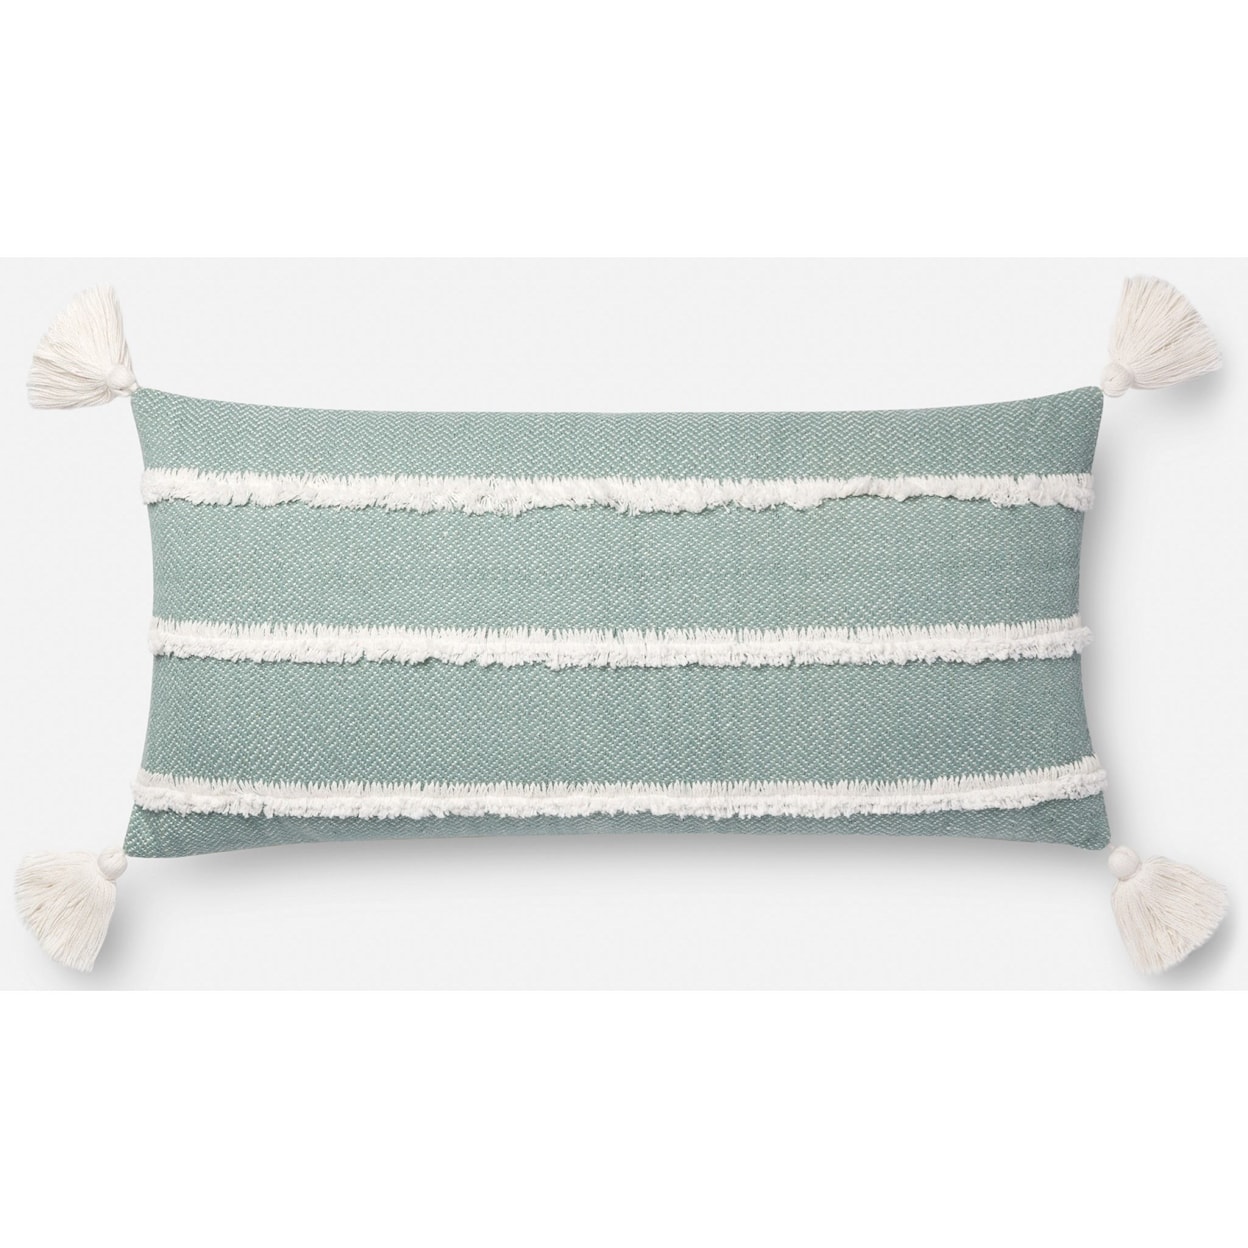 Magnolia Home by Joanna Gaines for Loloi Accent Pillows 12" x 27" Polyester Pillow